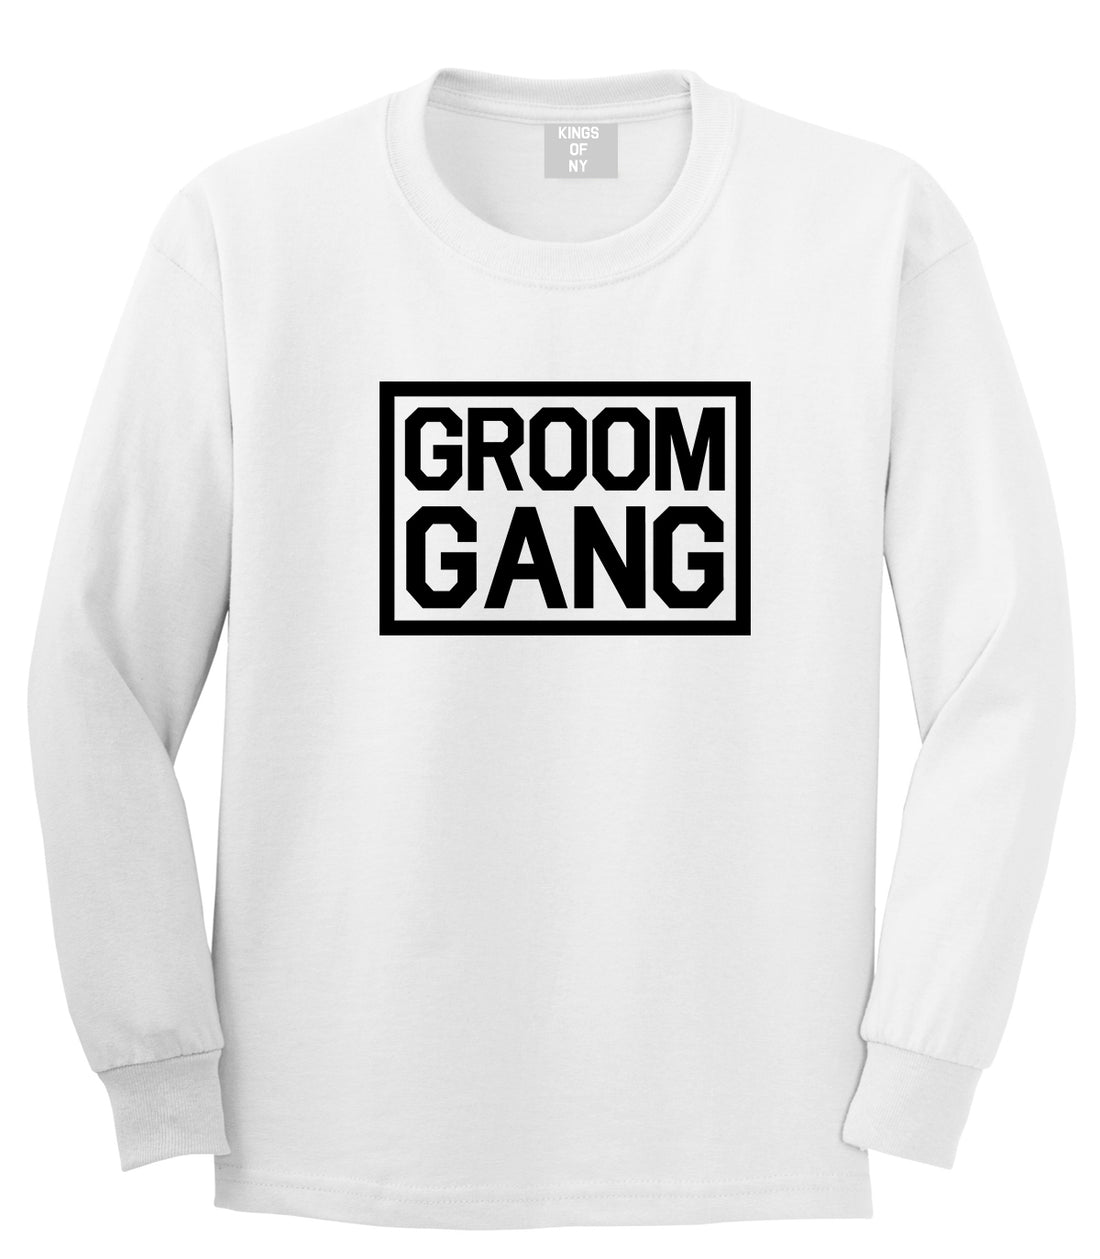 Groom Gang Bachelor Party White Long Sleeve T-Shirt by Kings Of NY